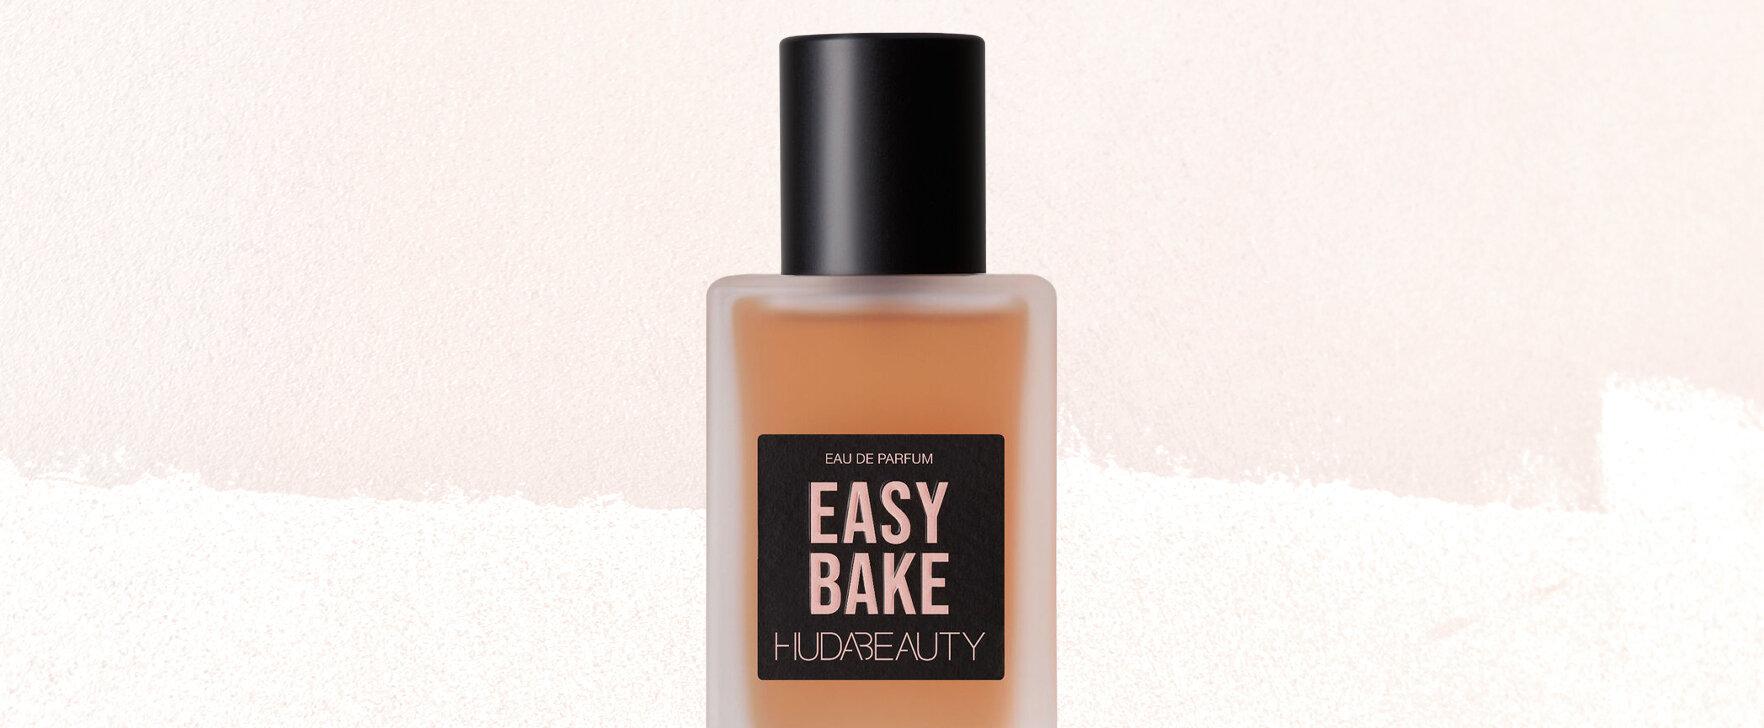 From Powder to Perfume: The Limited-Edition Eau de Parfum Easy Bake From Huda Beauty